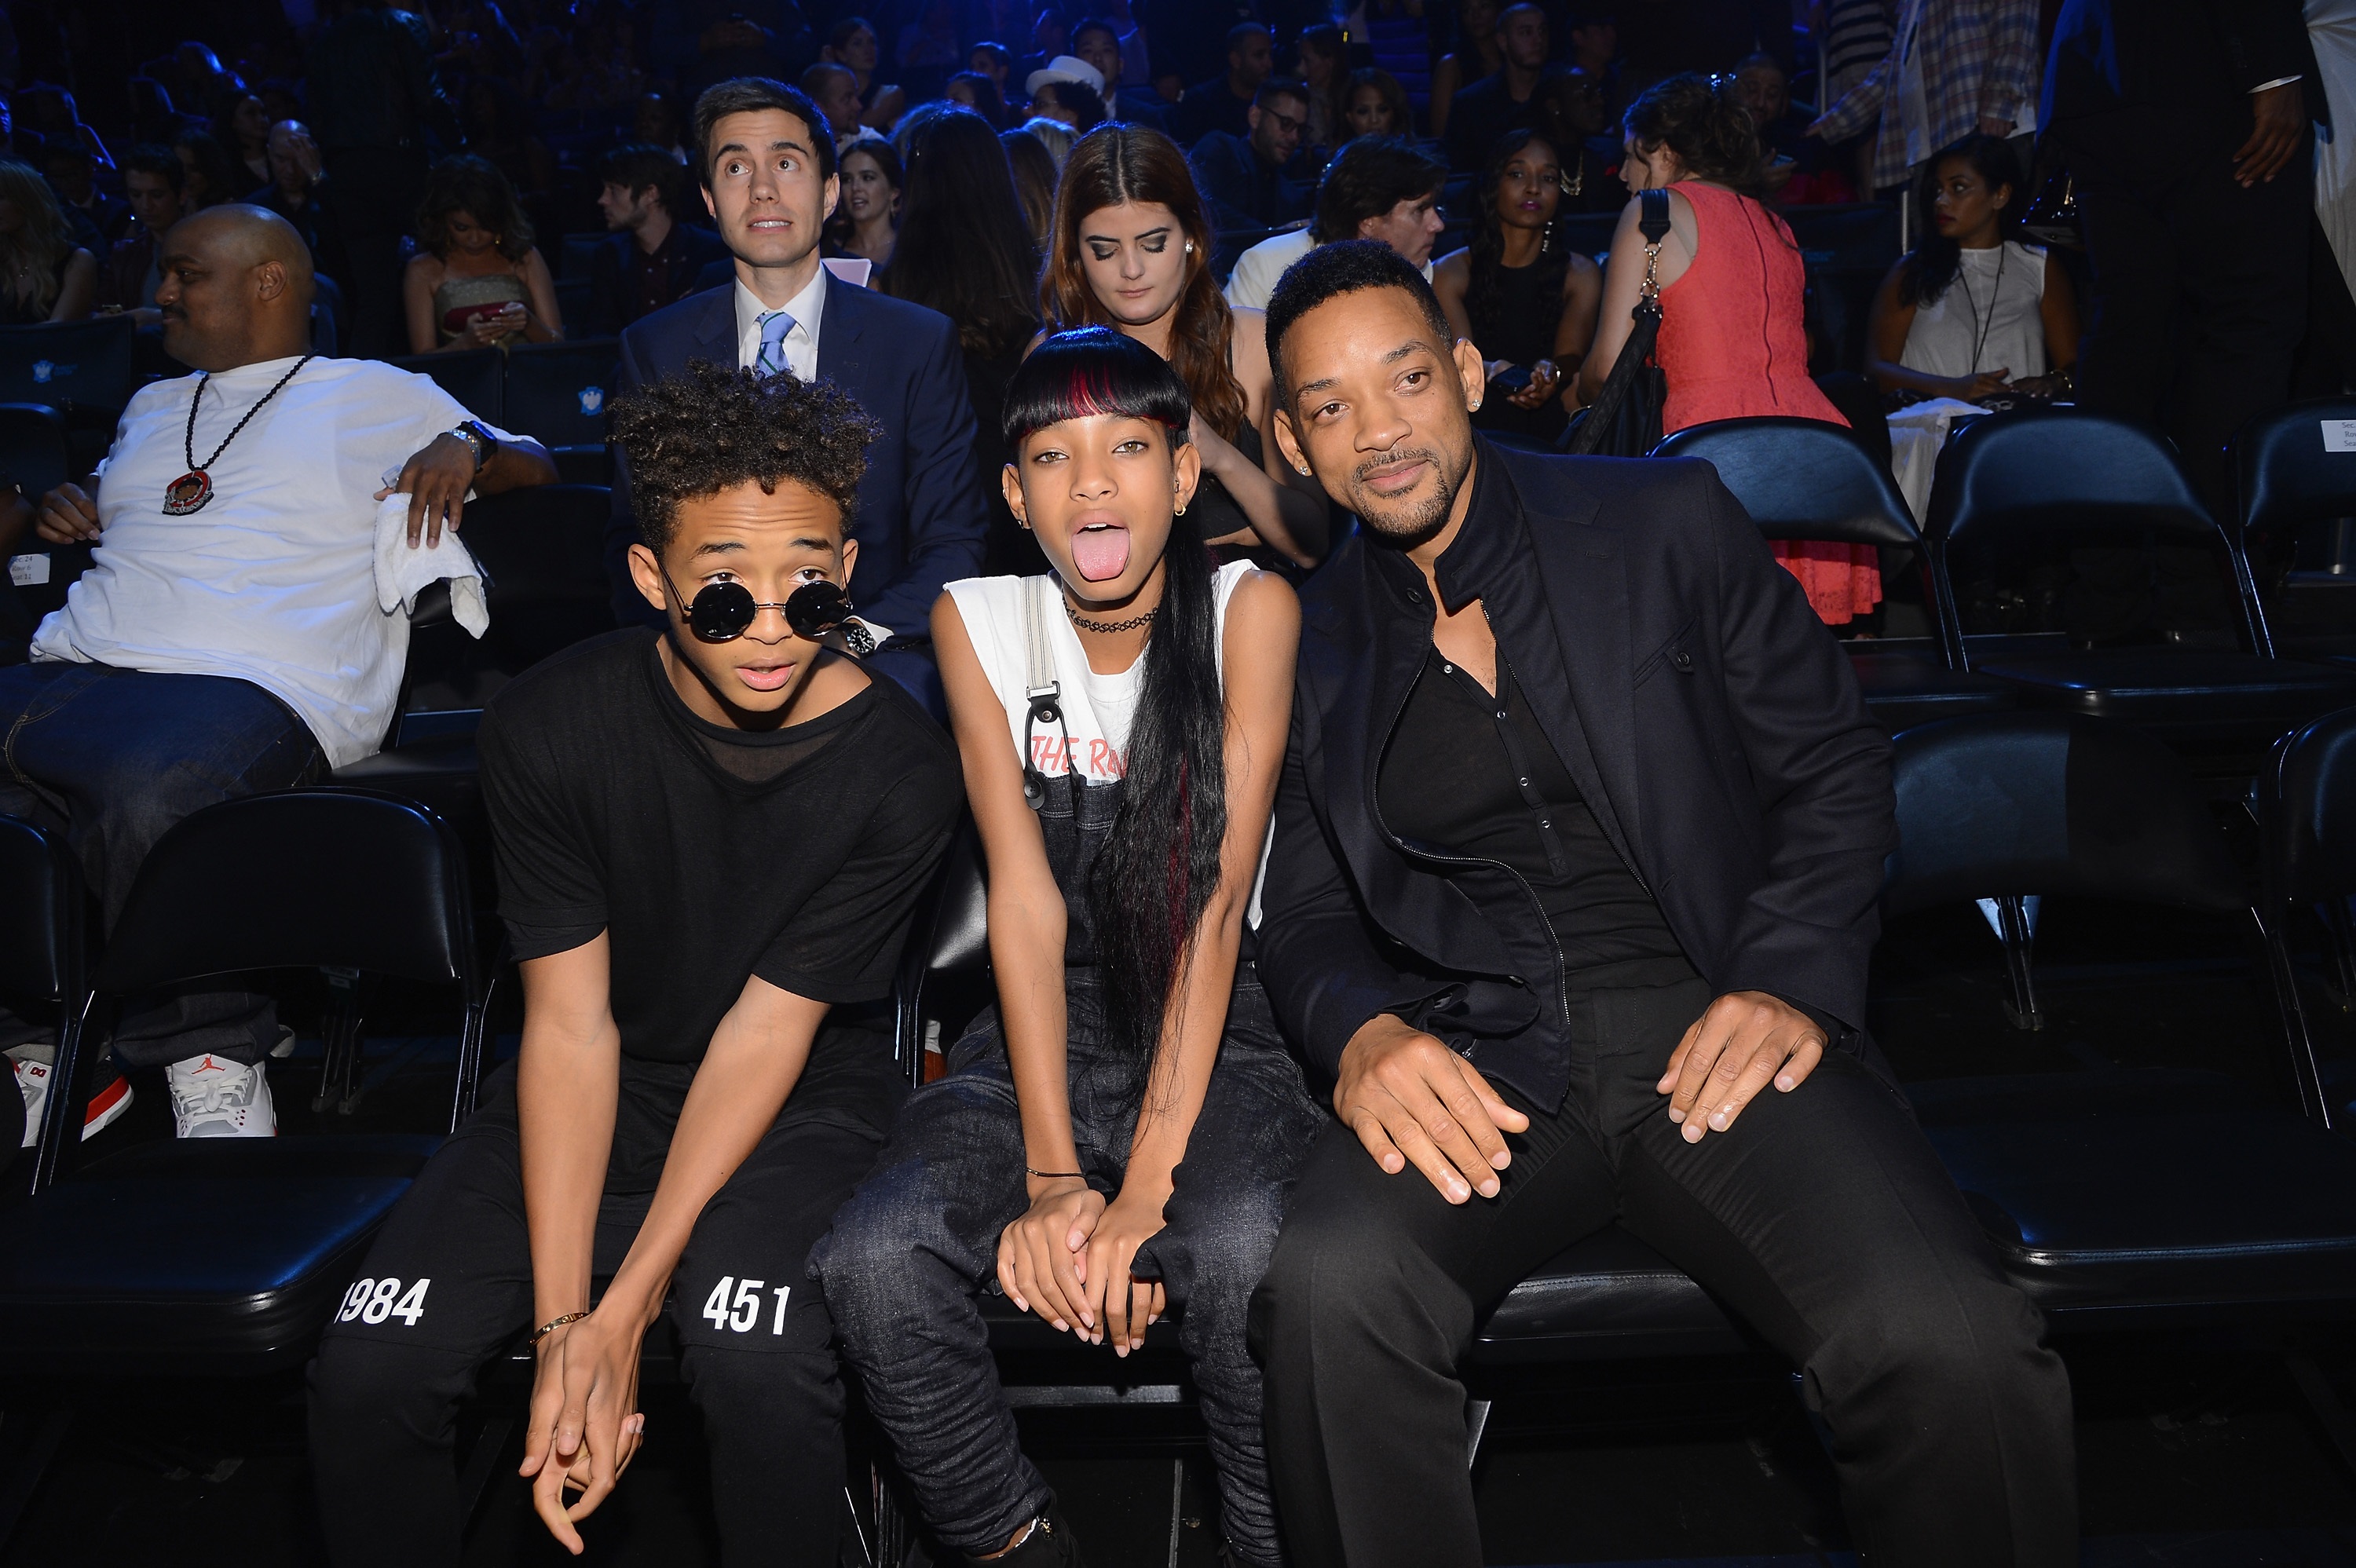 Jaden Smith, Willow Smith and Will Smith